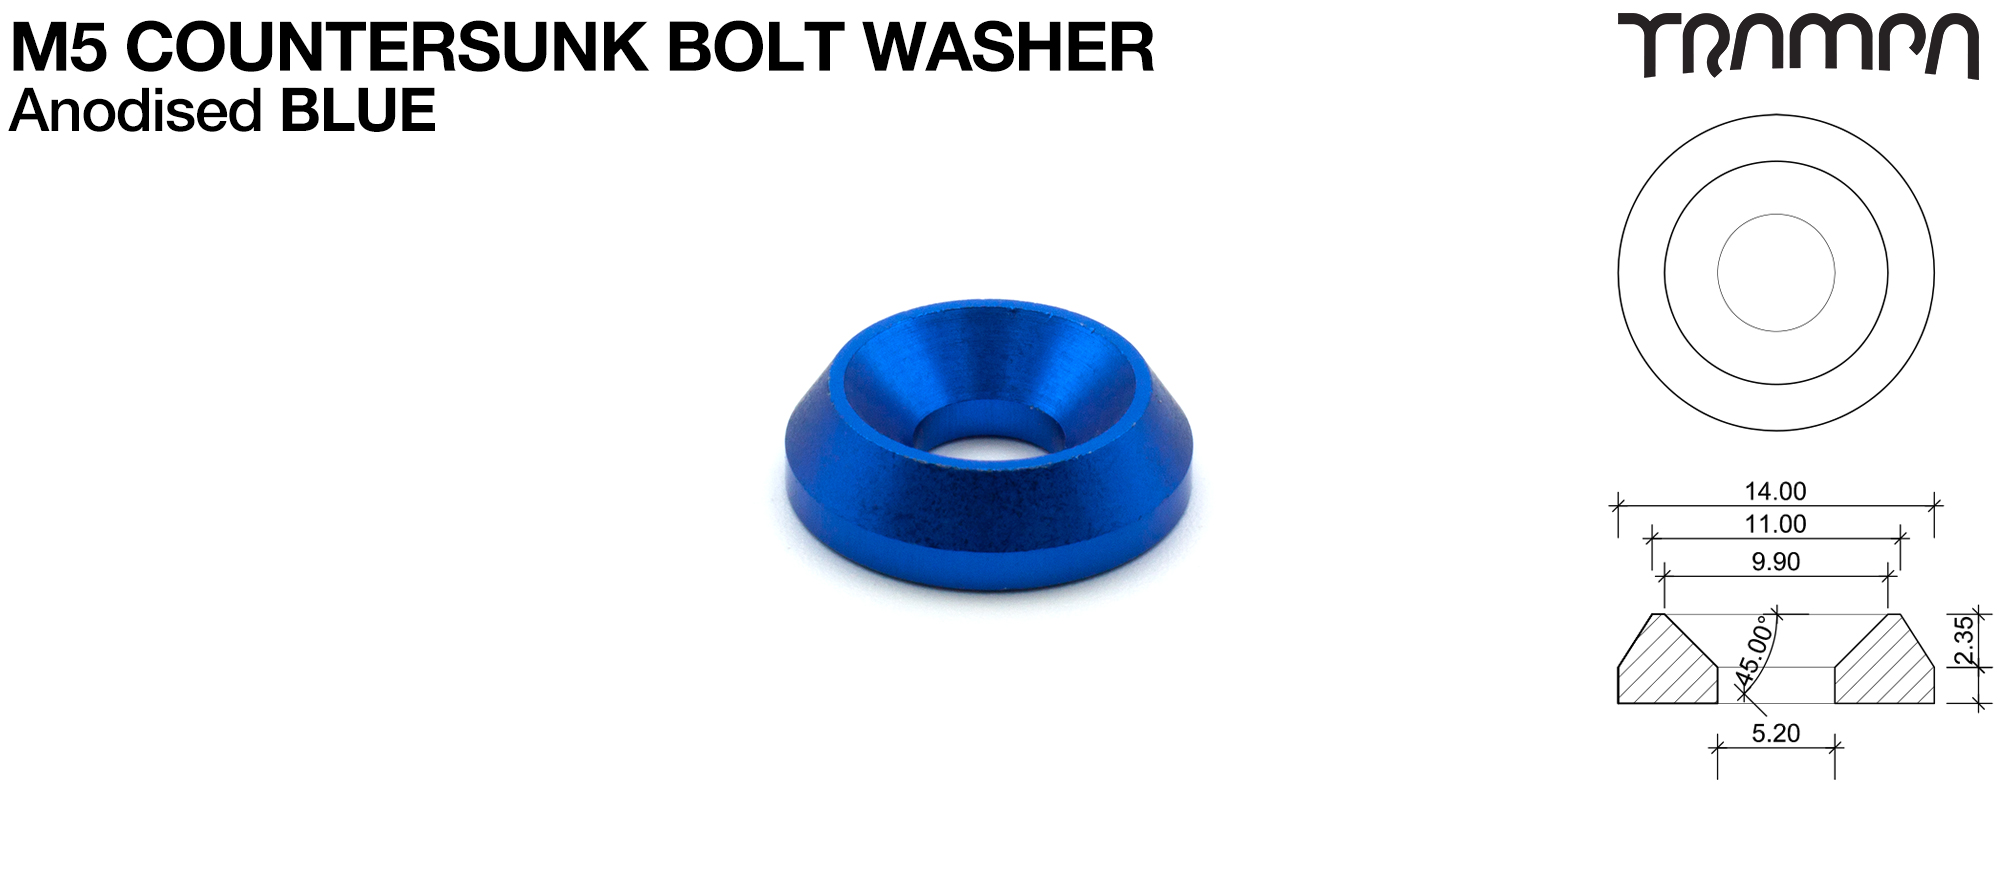 BLUE Anodised M5 Countersunk Washers